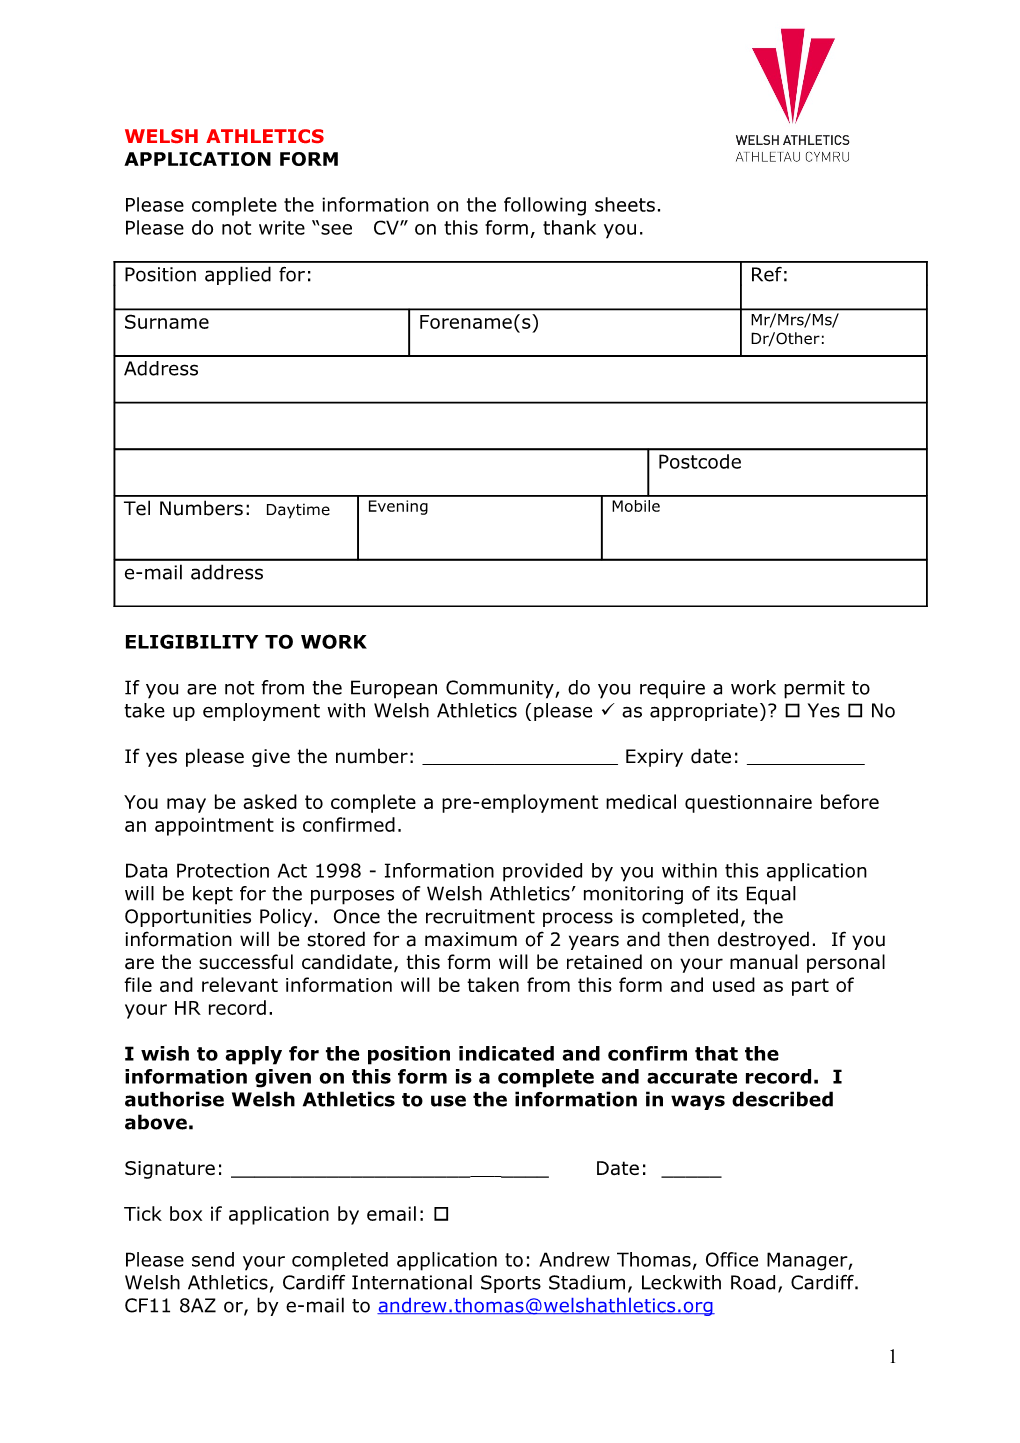 Application Form for Employment